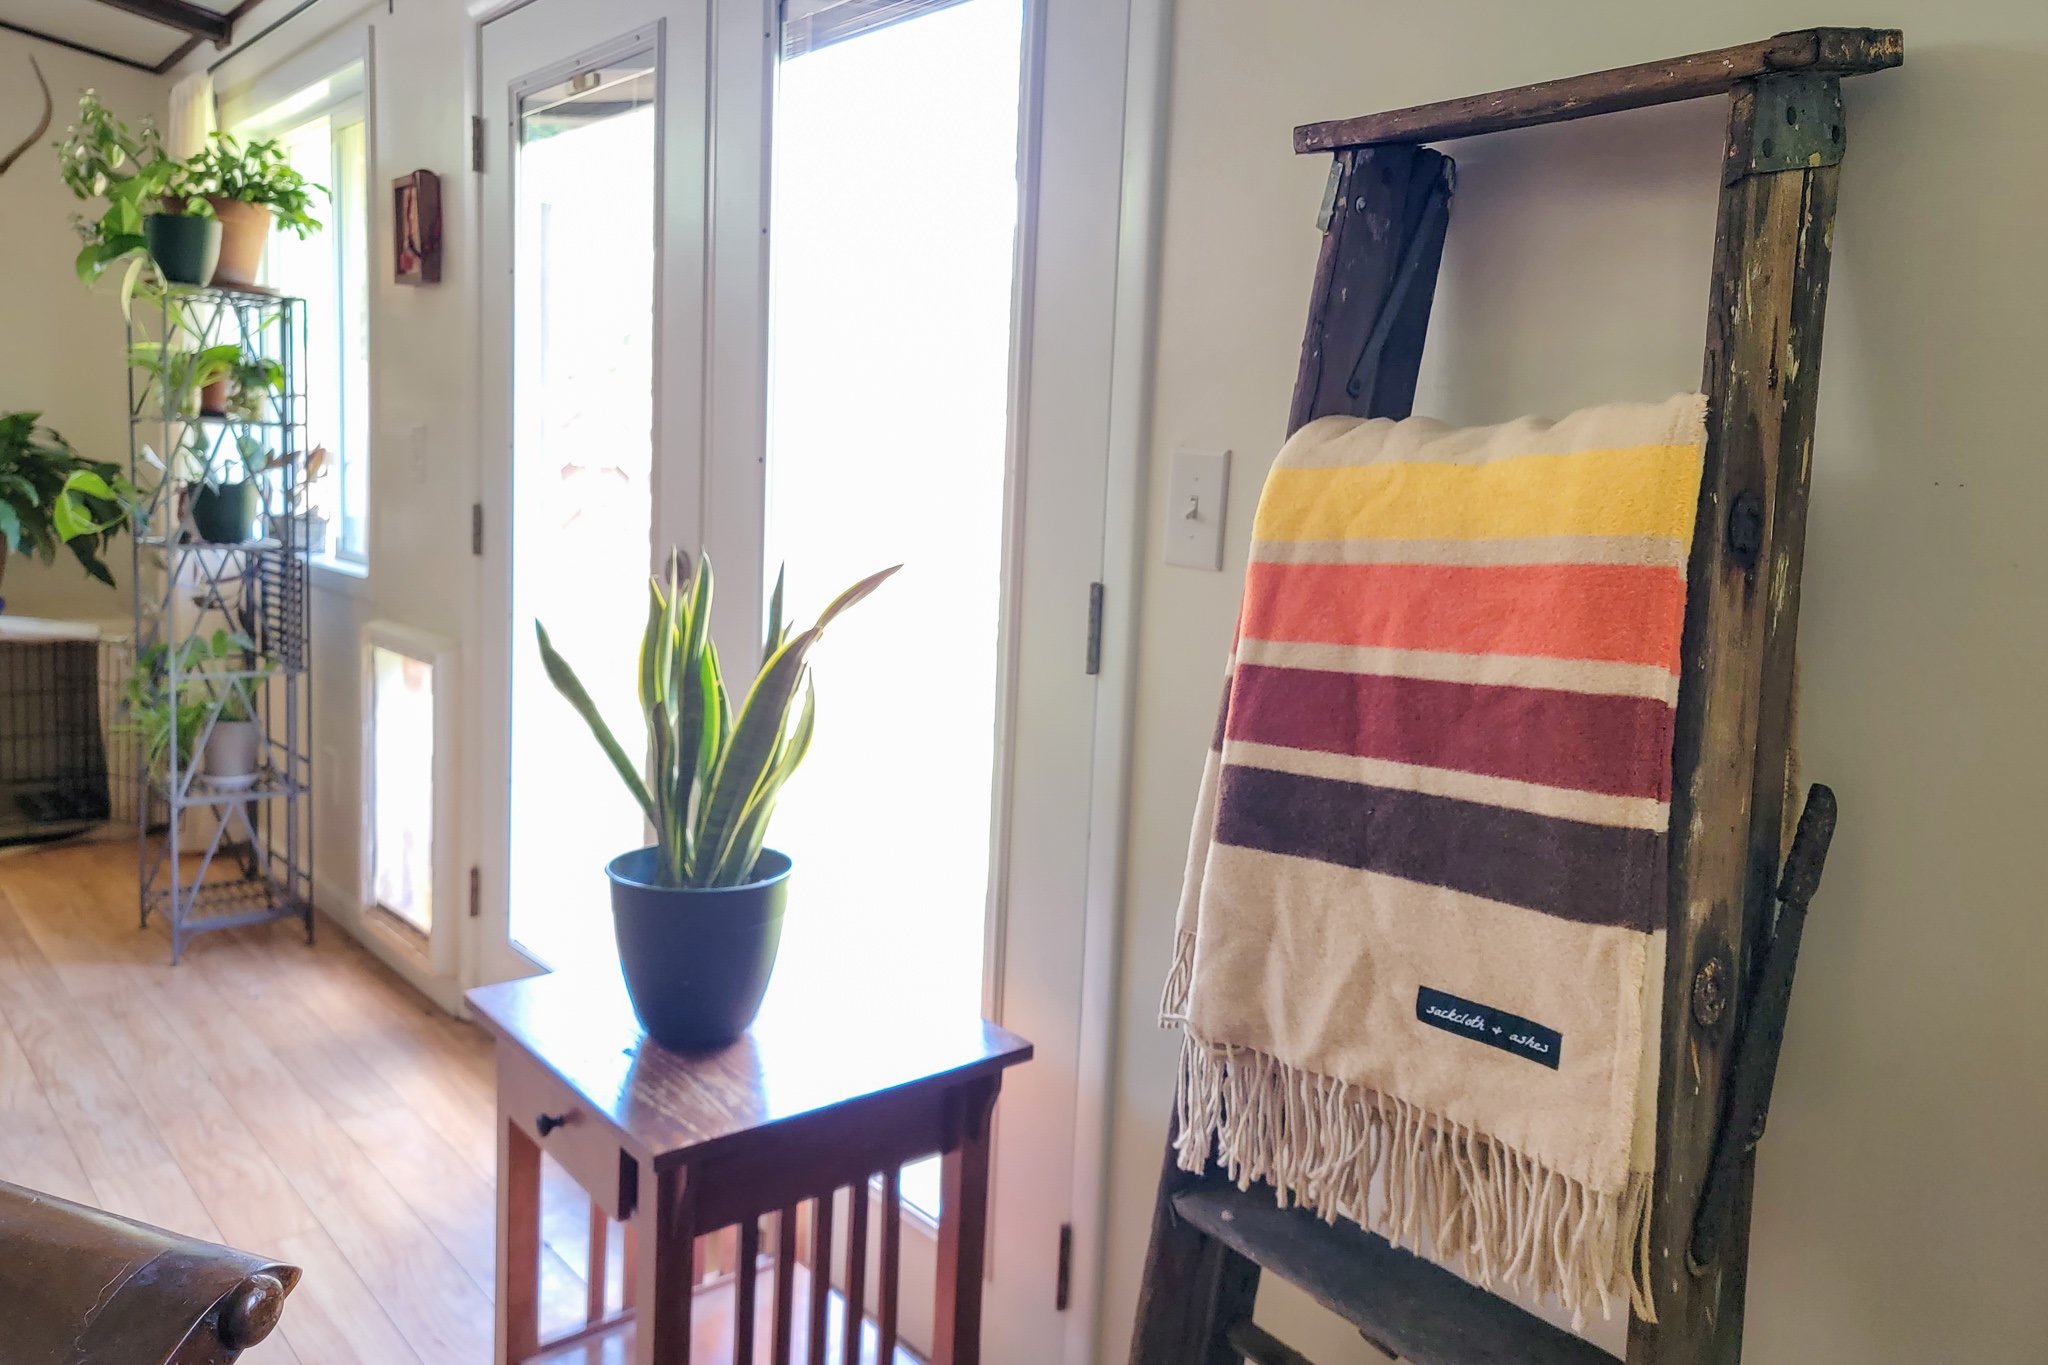 Sackcloth and Ashes Camp Blanket hanging on a ladder in a plant-filled living room